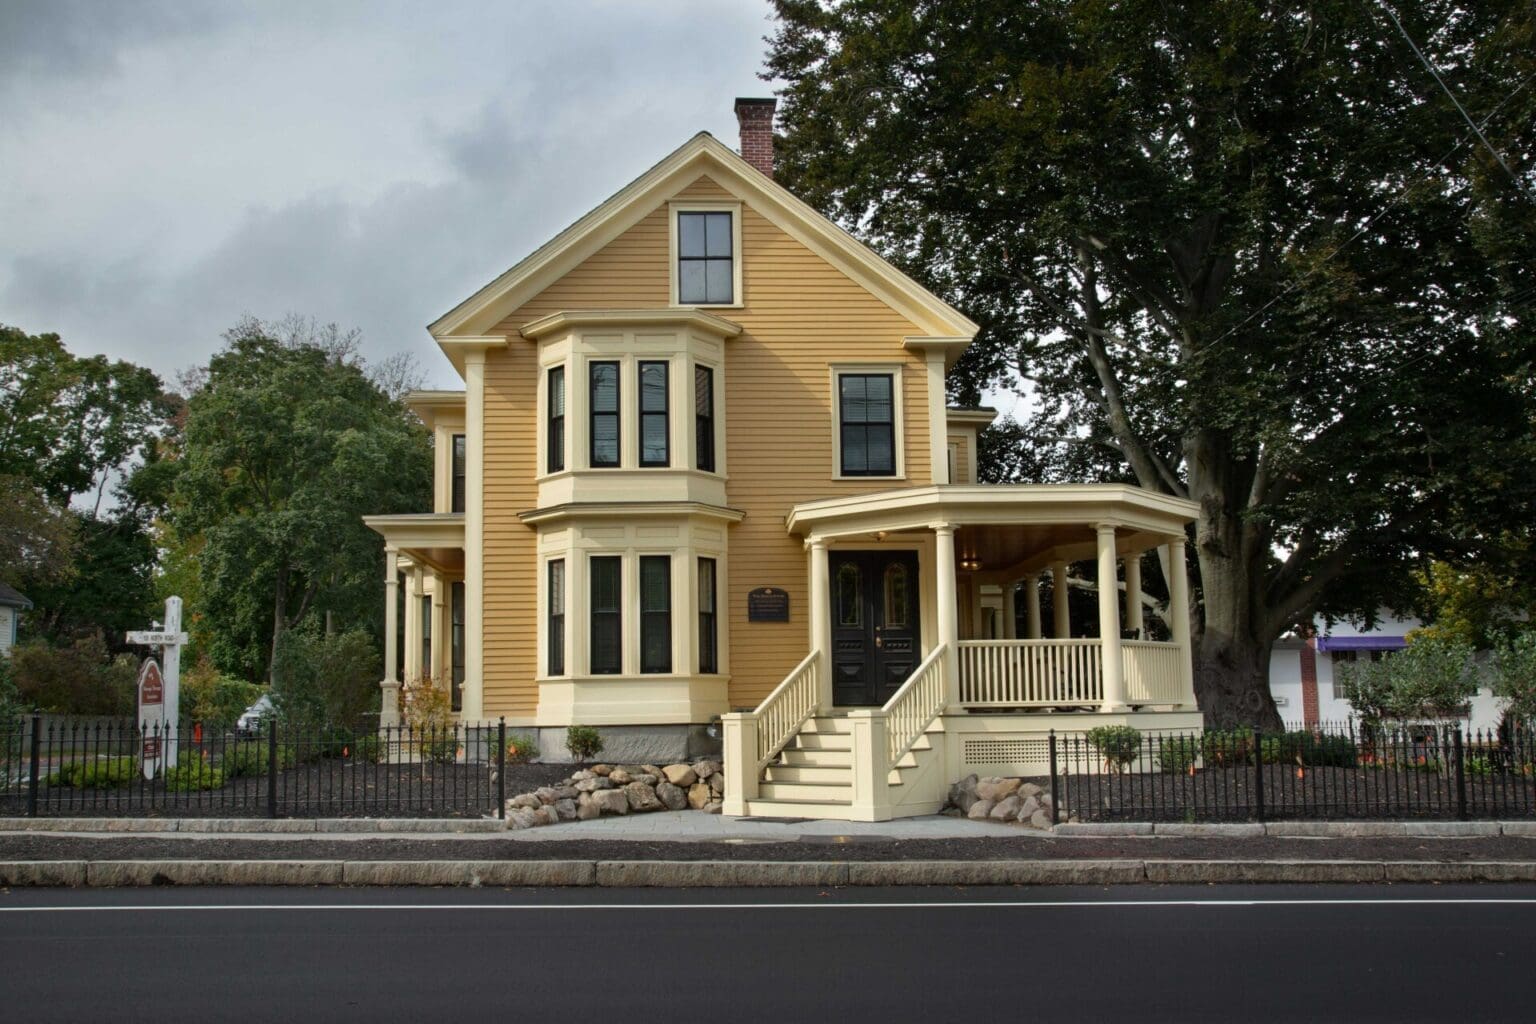 A photo of a yellow building with a front porch with yellow columns and railings from street view.